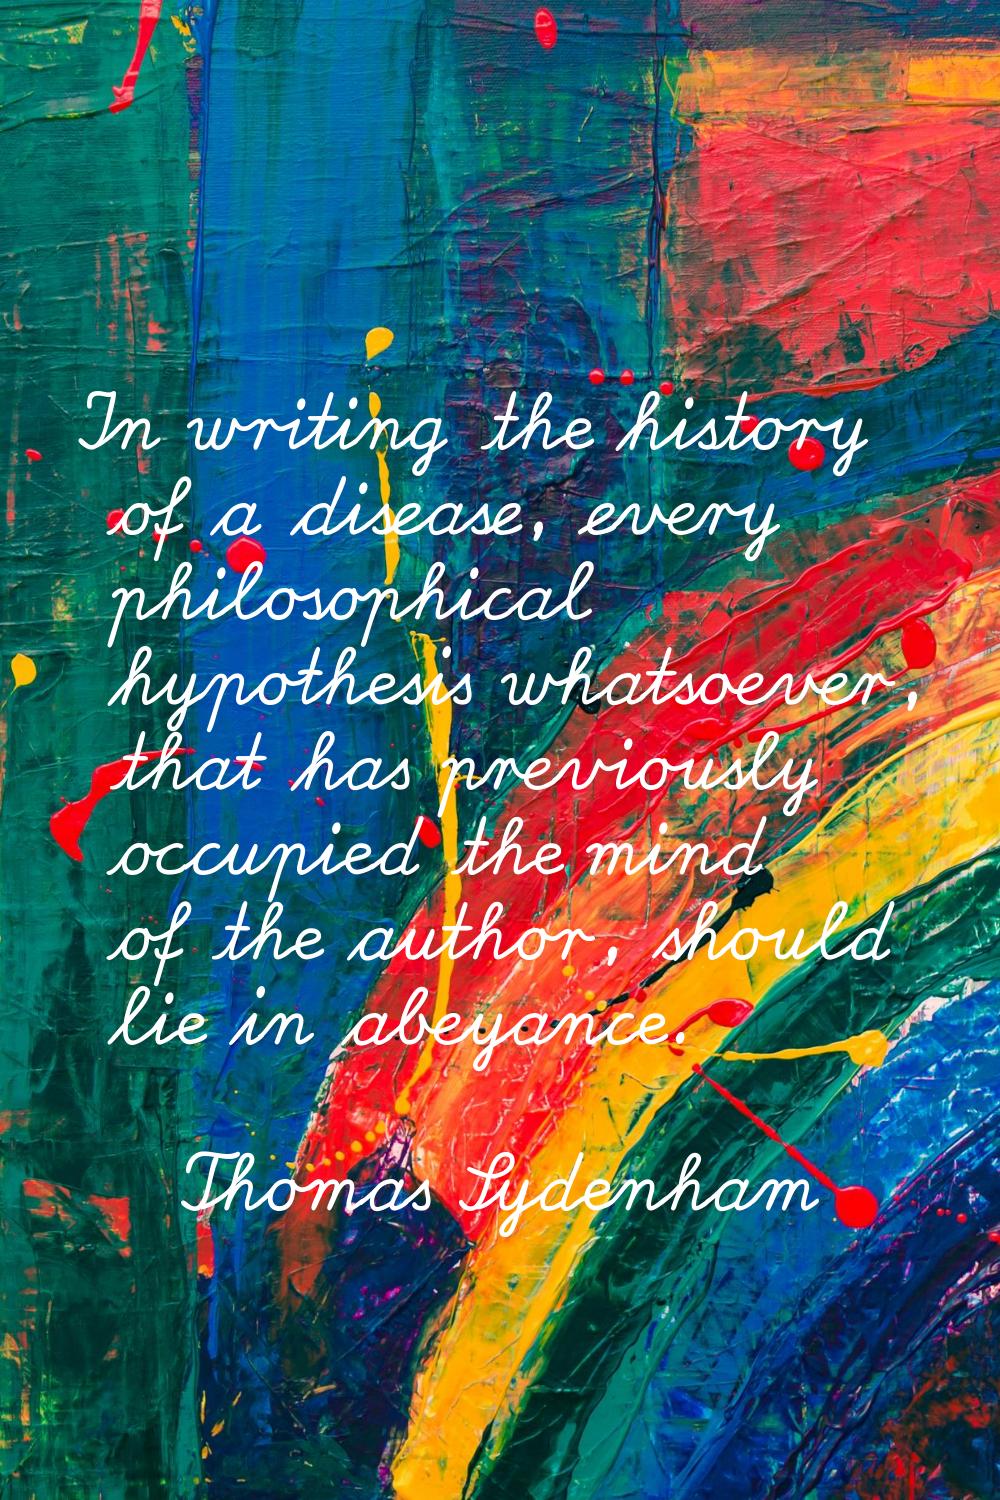 In writing the history of a disease, every philosophical hypothesis whatsoever, that has previously